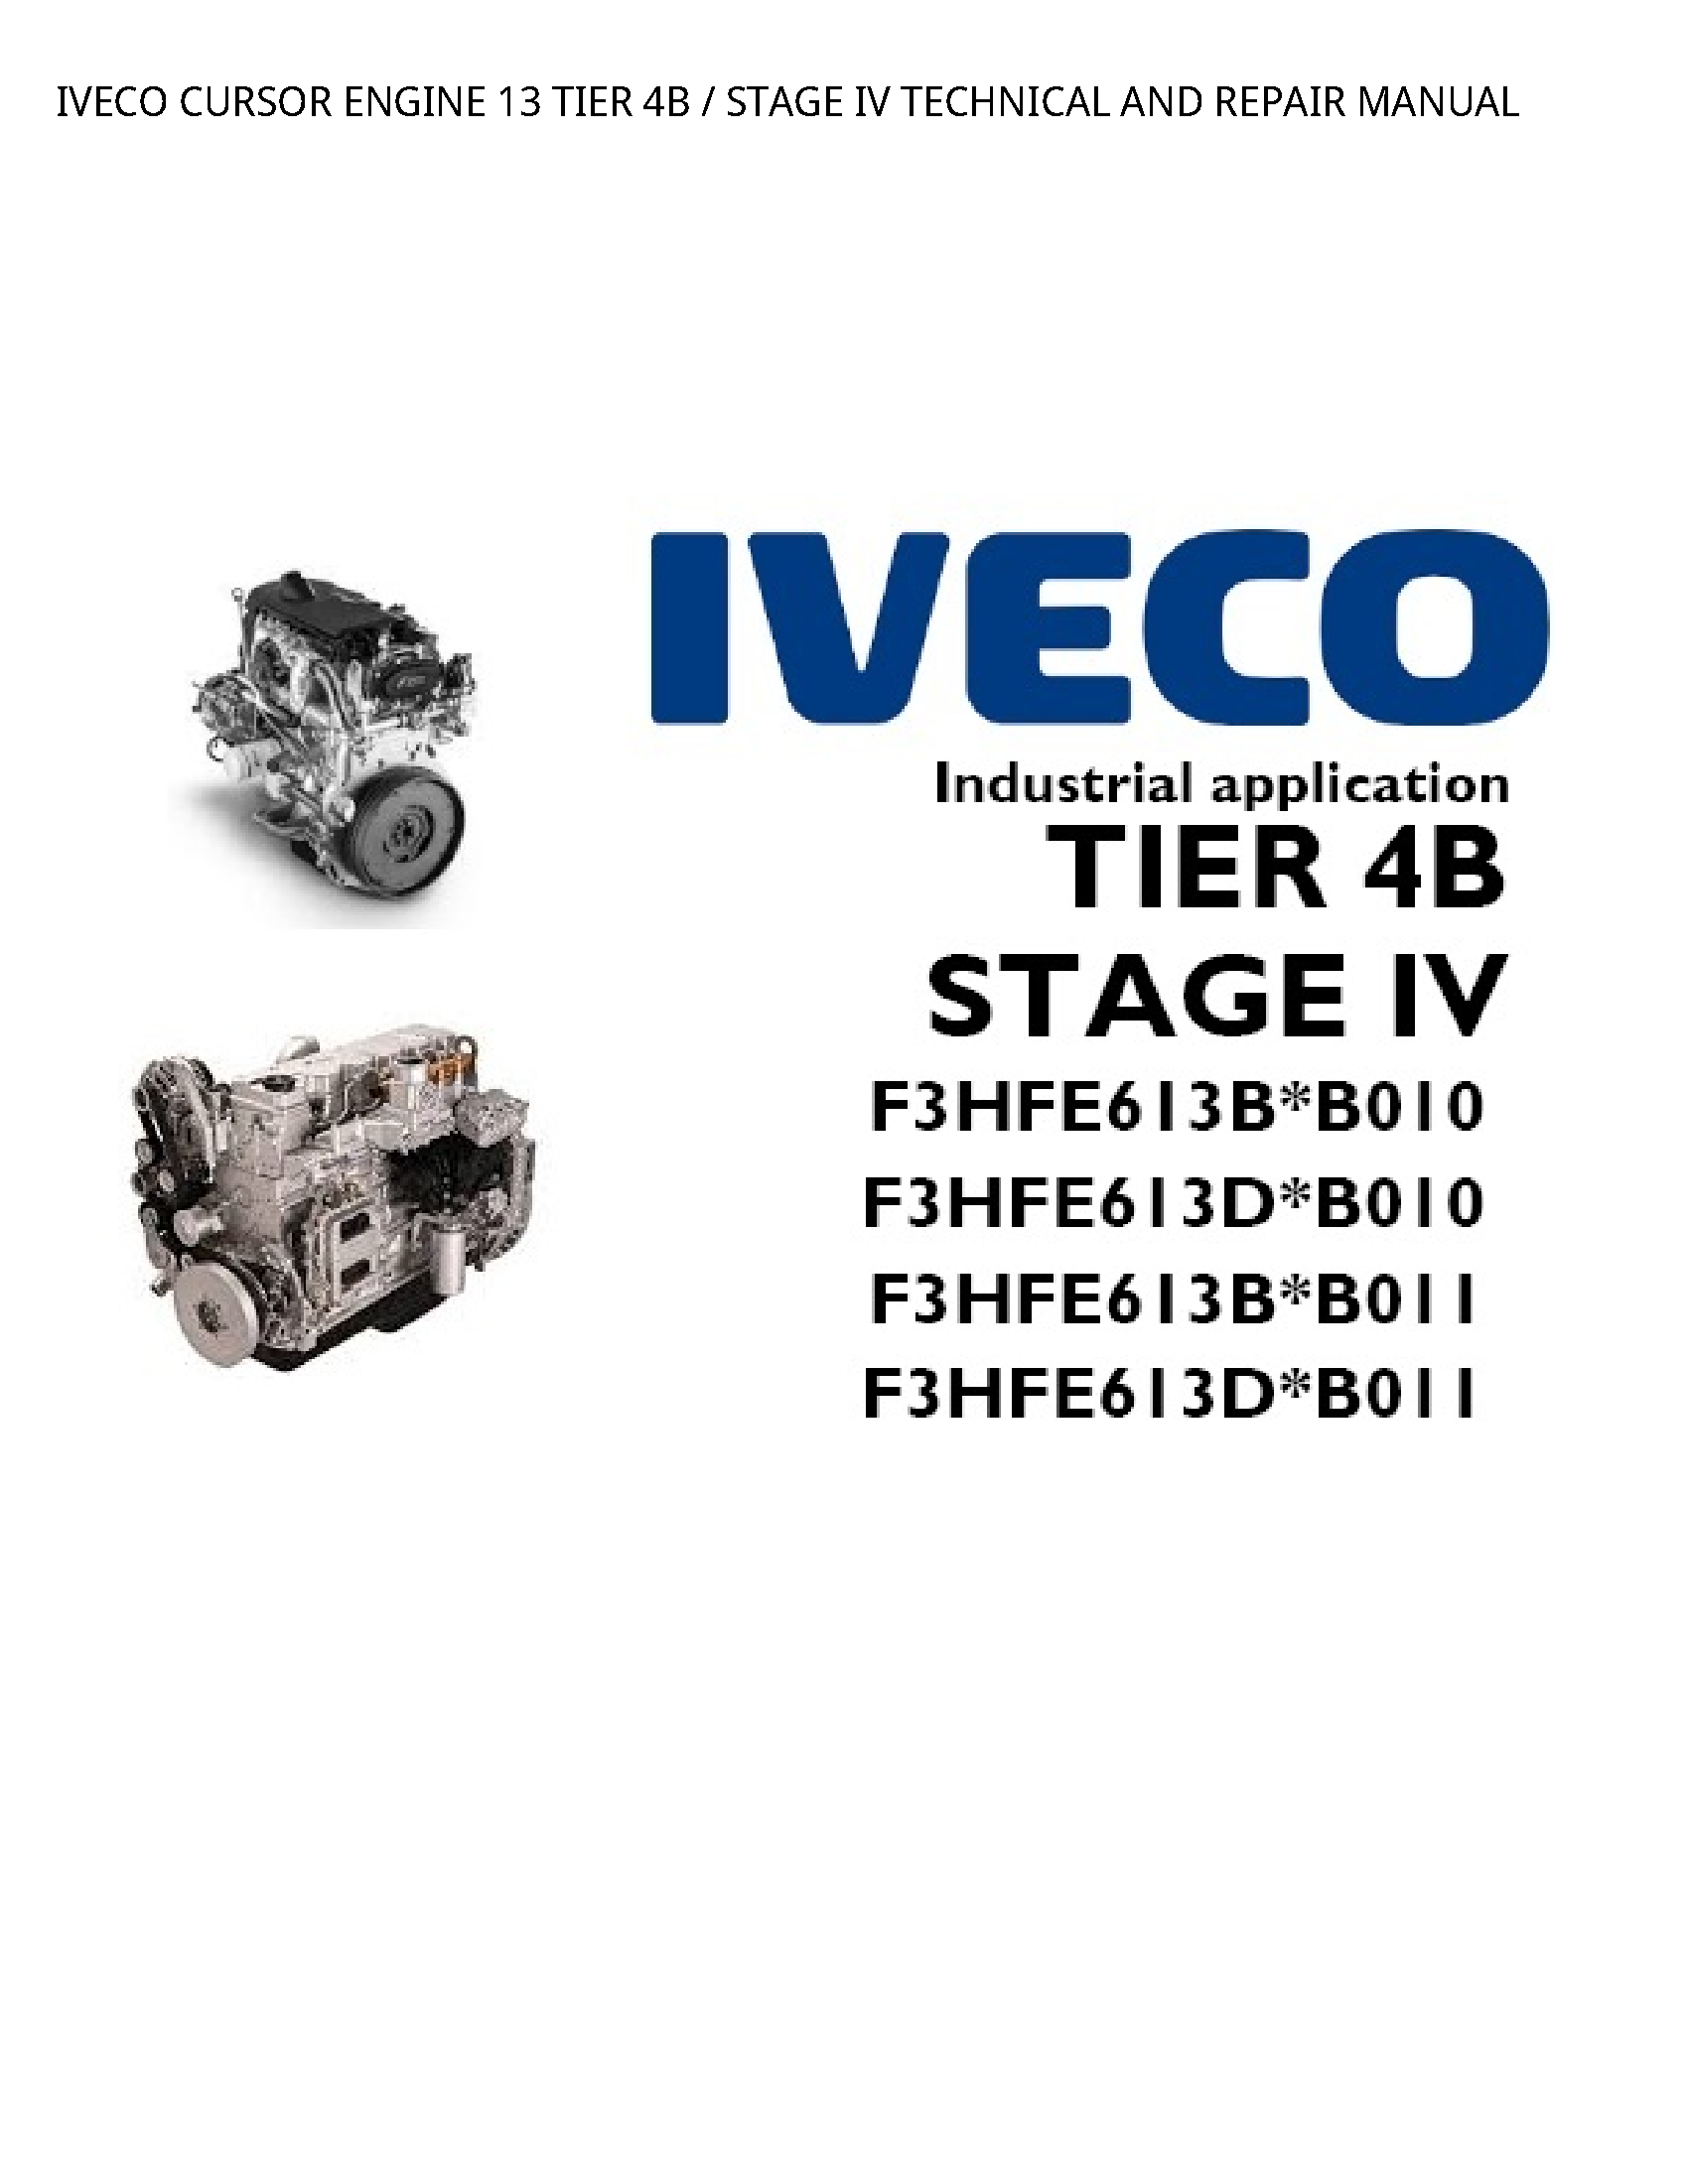 Iveco 13 CURSOR ENGINE TIER STAGE IV TECHNICAL AND REPAIR manual